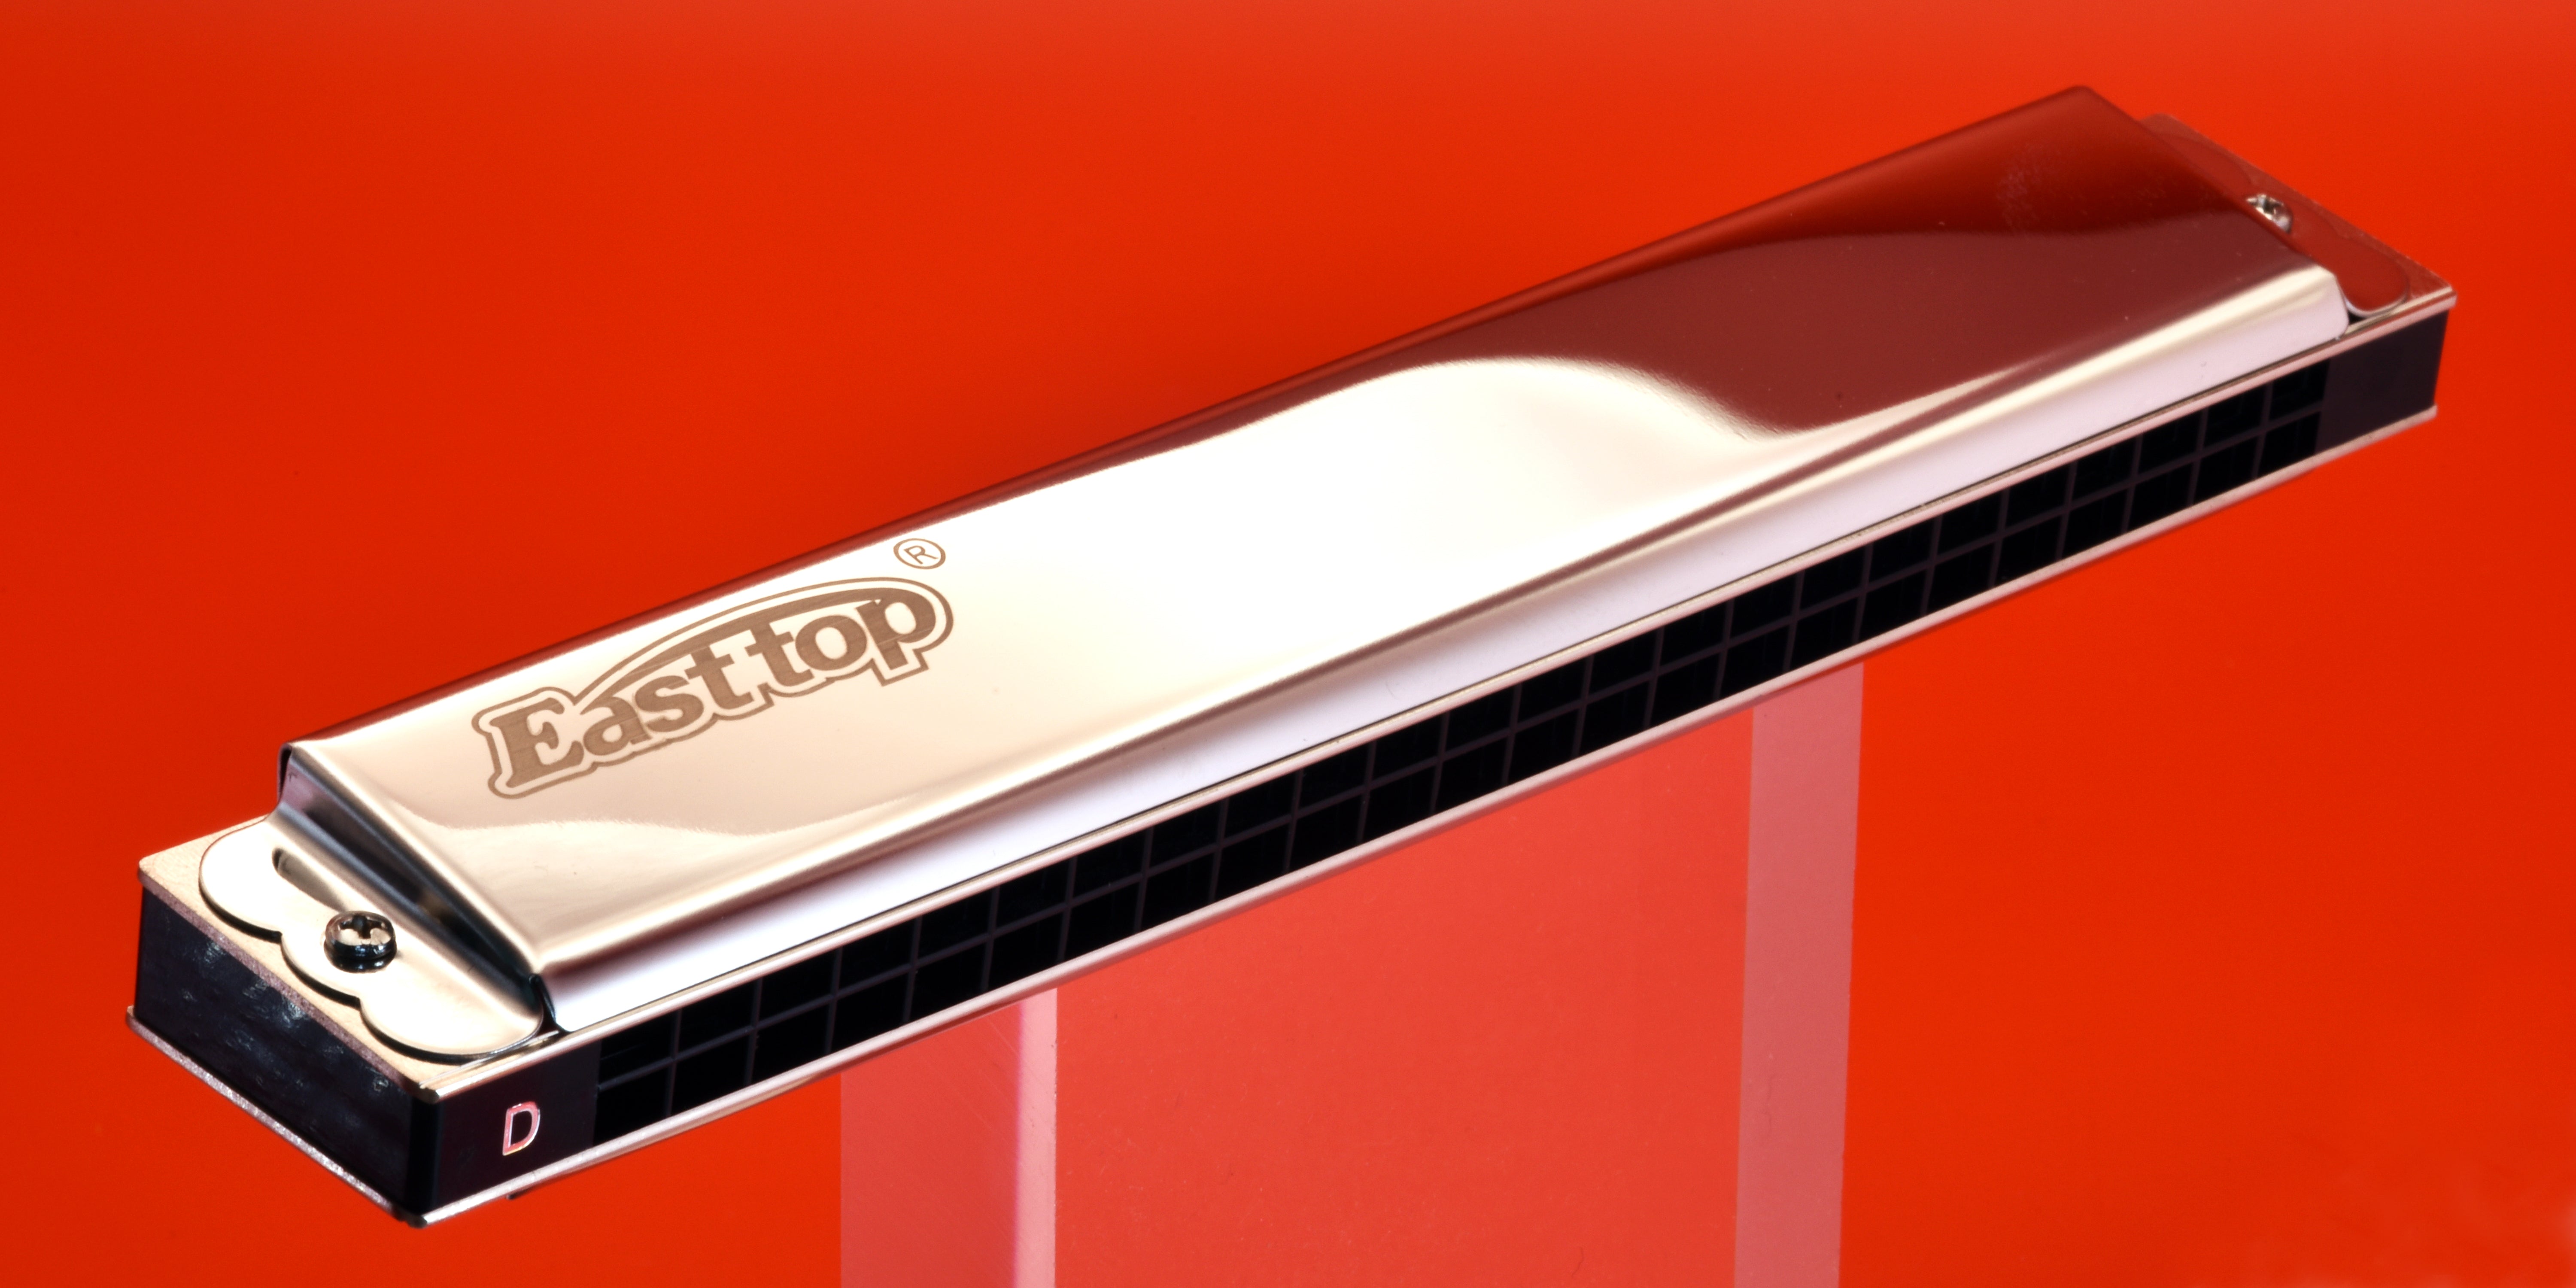 Easttop Tremolo harmonica T2403 available in C, D and G keys - £24.00